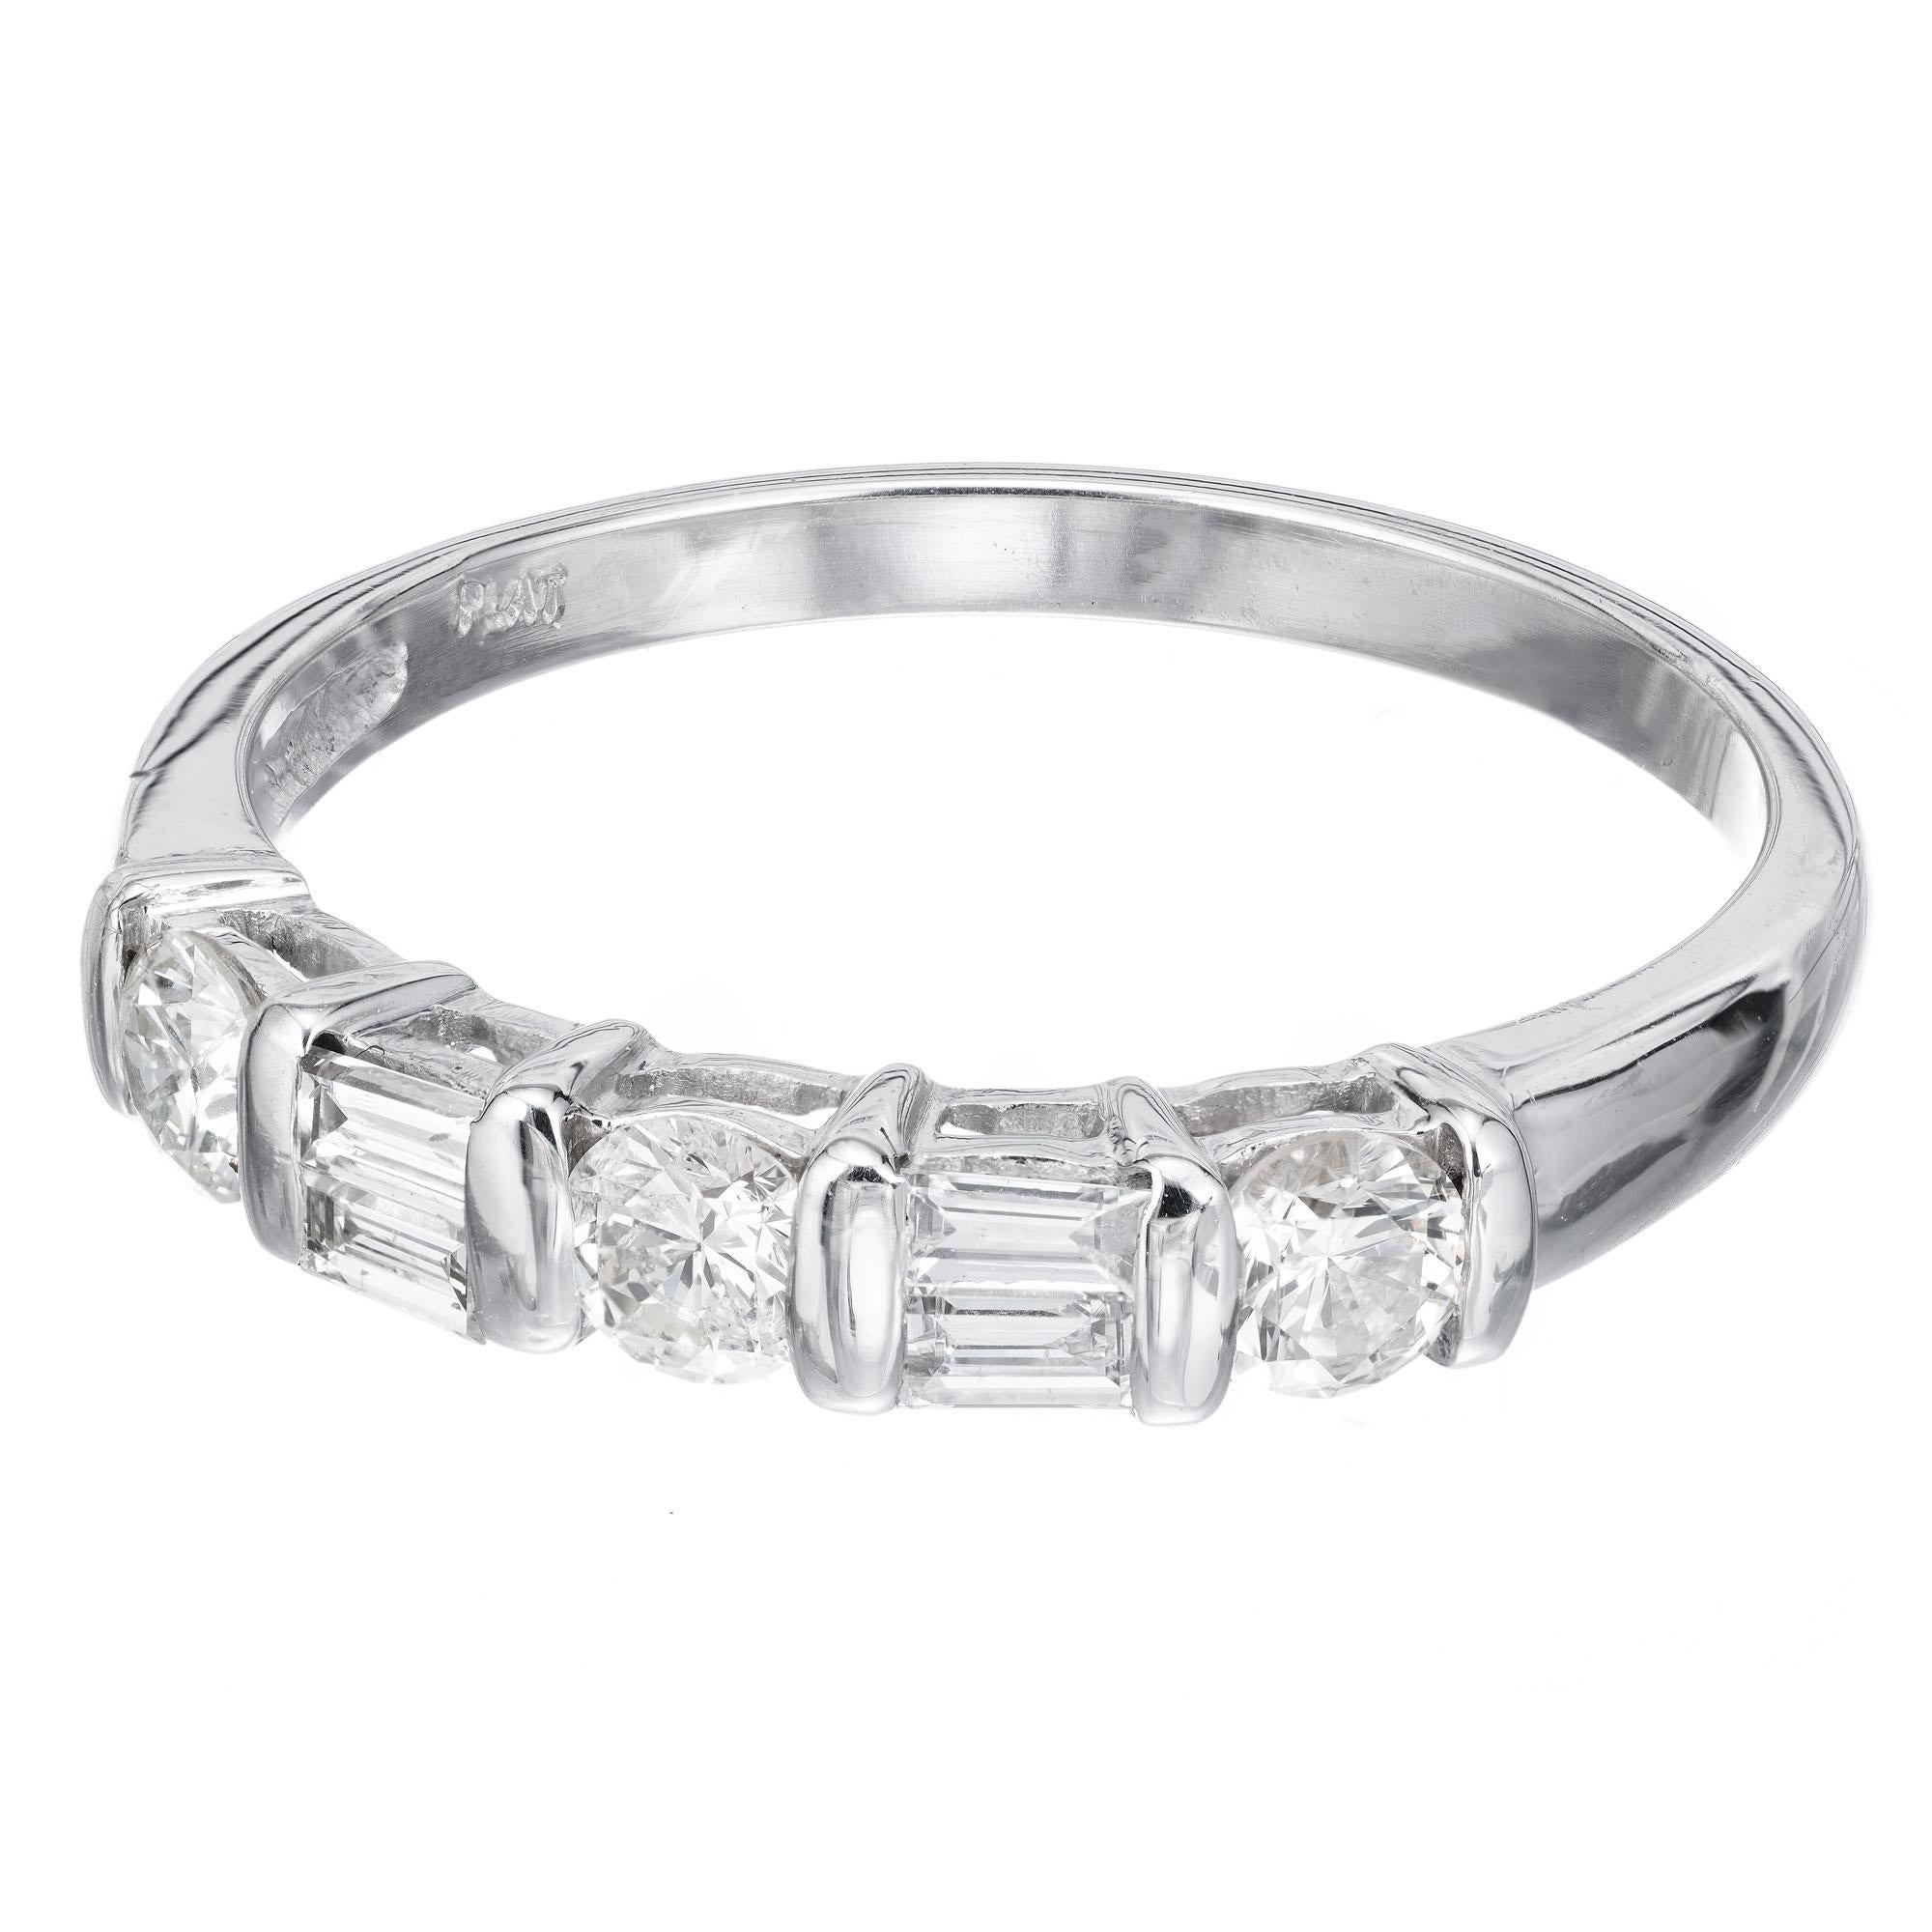 Alternating round and baguette diamond seven stone .50ct platinum wedding band ring. 

3 round brilliant cut diamonds .31cts
4 straight cut baguette diamonds, I-J SI approx. .19cts
Size 5.75 and sizable 
Platinum 
Stamped: PT950
Width at top: